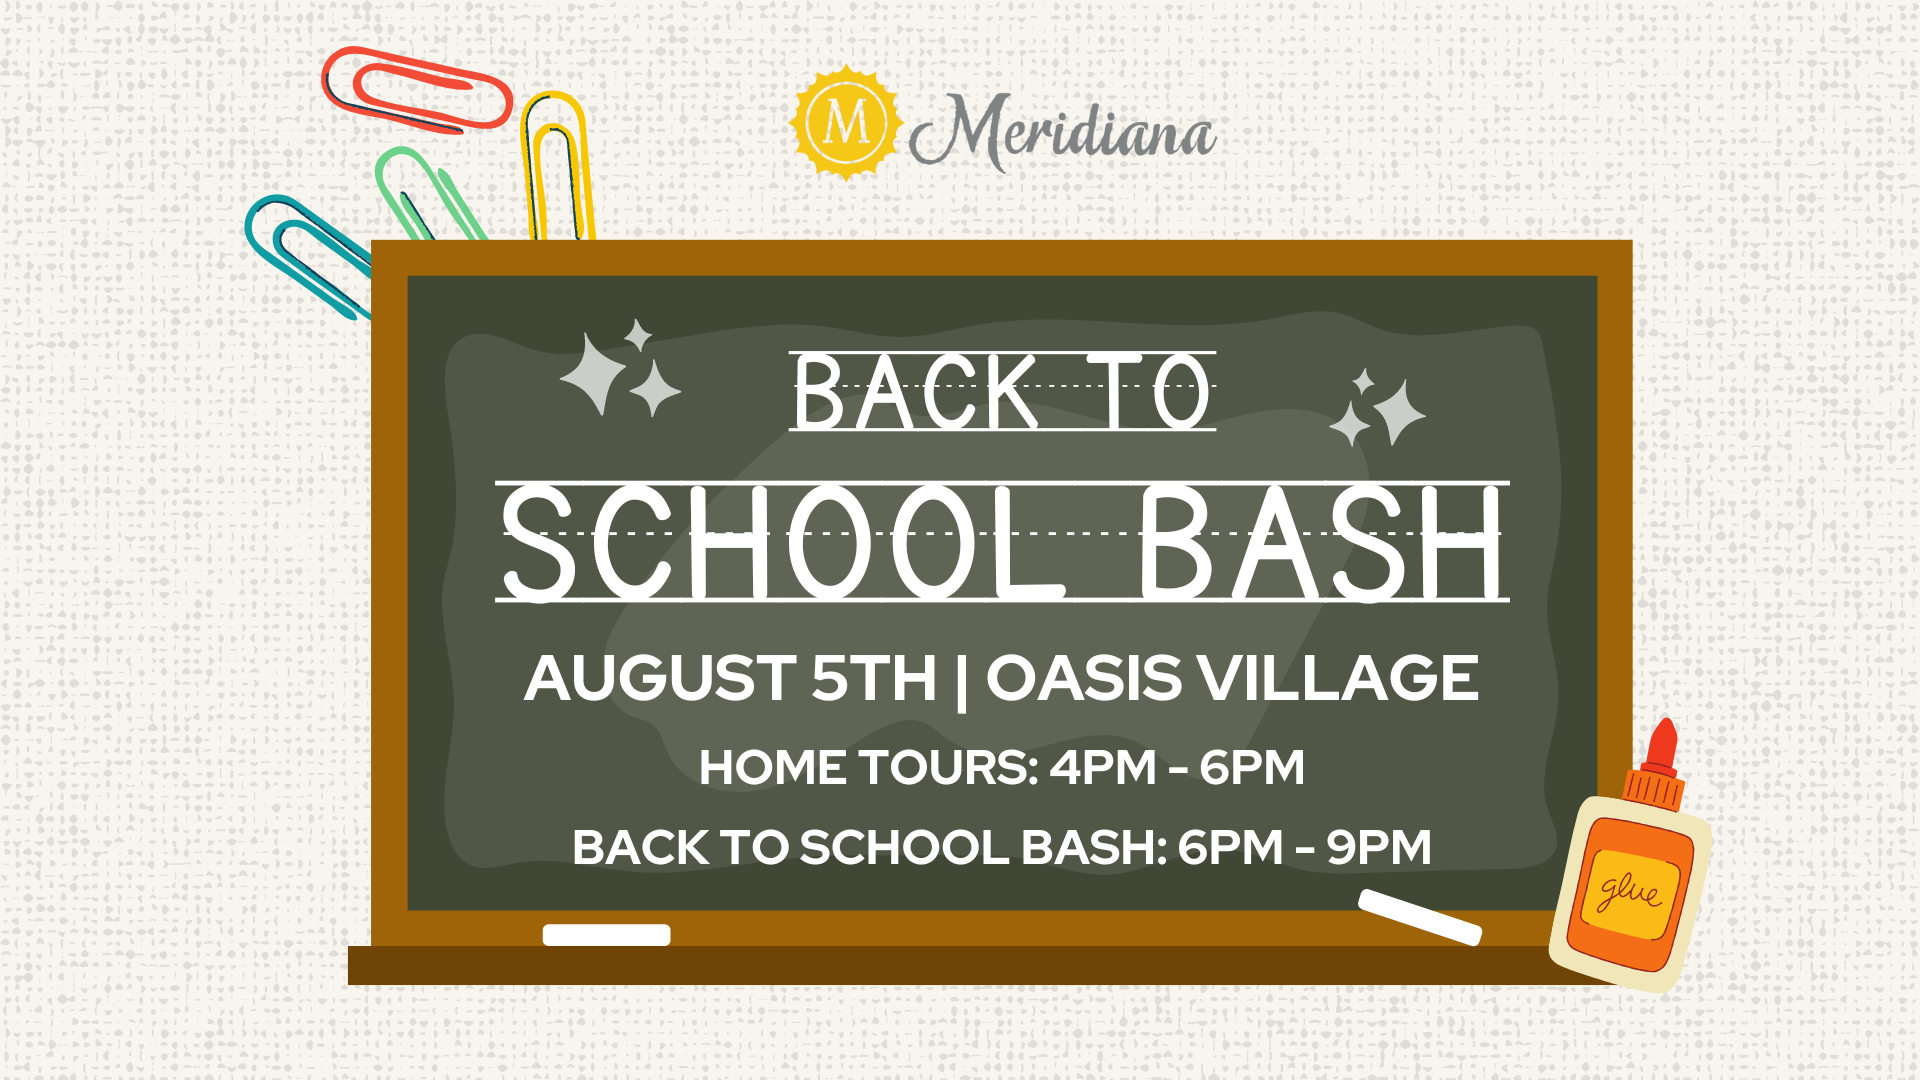 Texas 288 Community of Meridiana Hosts August 5 Back to School Bash